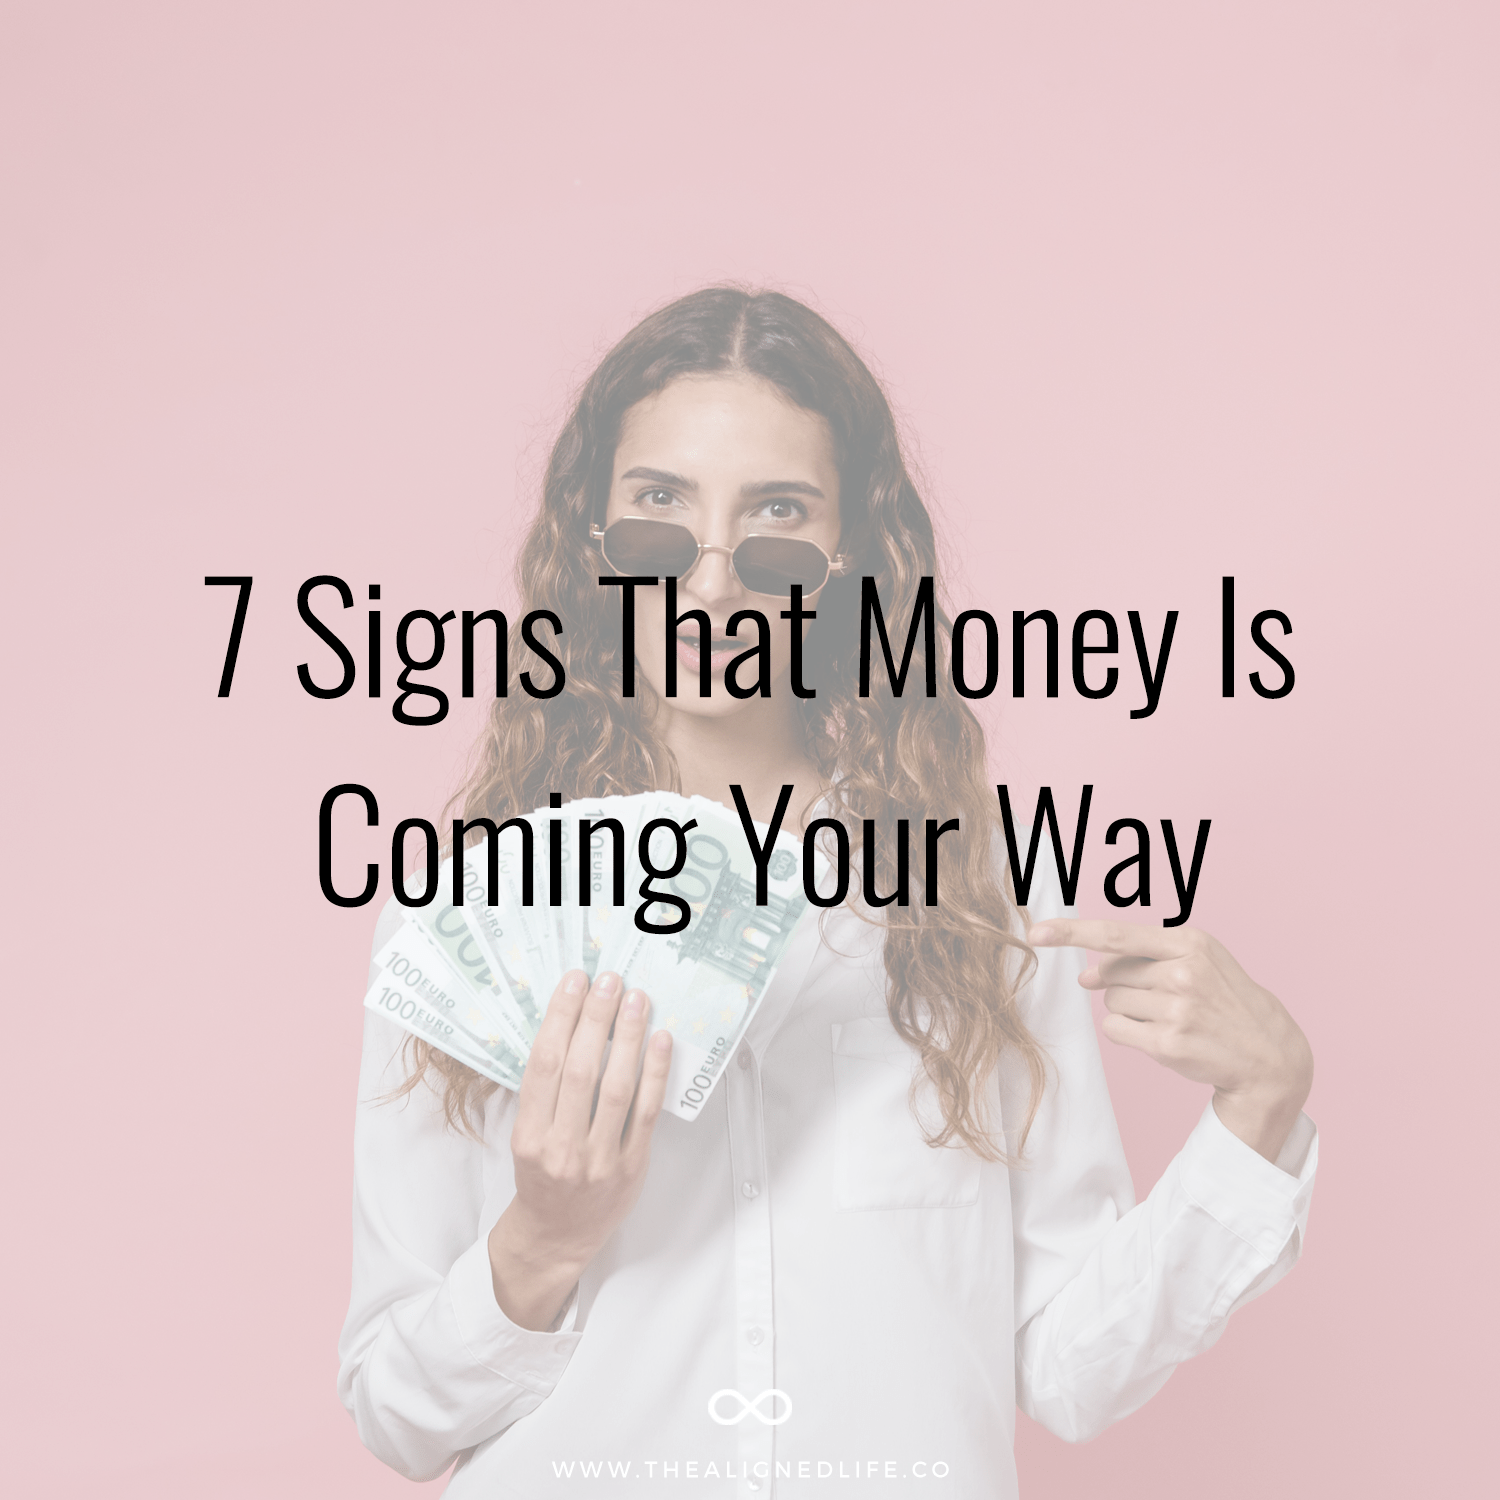 11 Signs That Money Is Coming Your Way